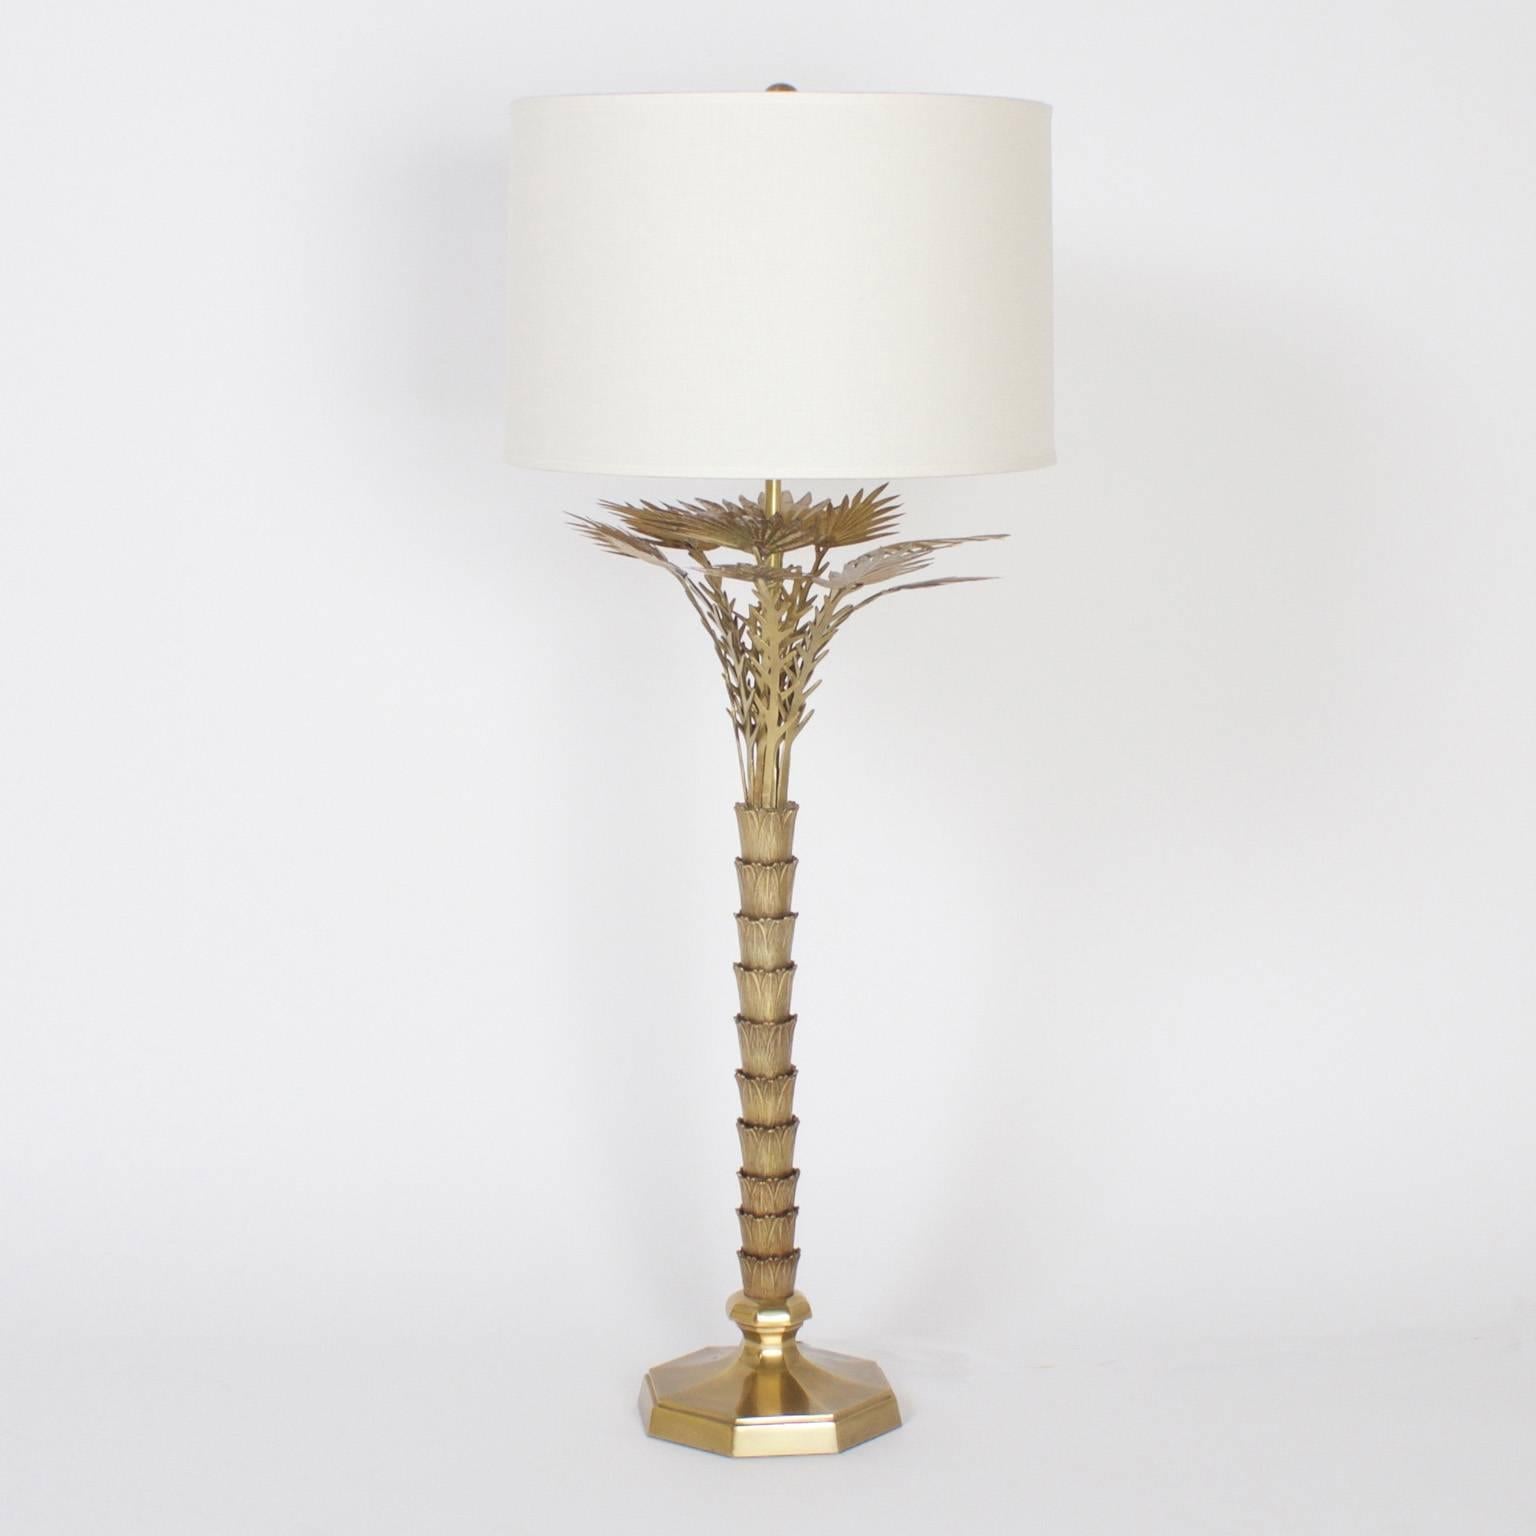 Pair of chic, Mid-Century brass stylized palm tree table lamps that combine a modern sensibility with a traditional subject. Hand polished and lacquered for easy care.
Newly wired.